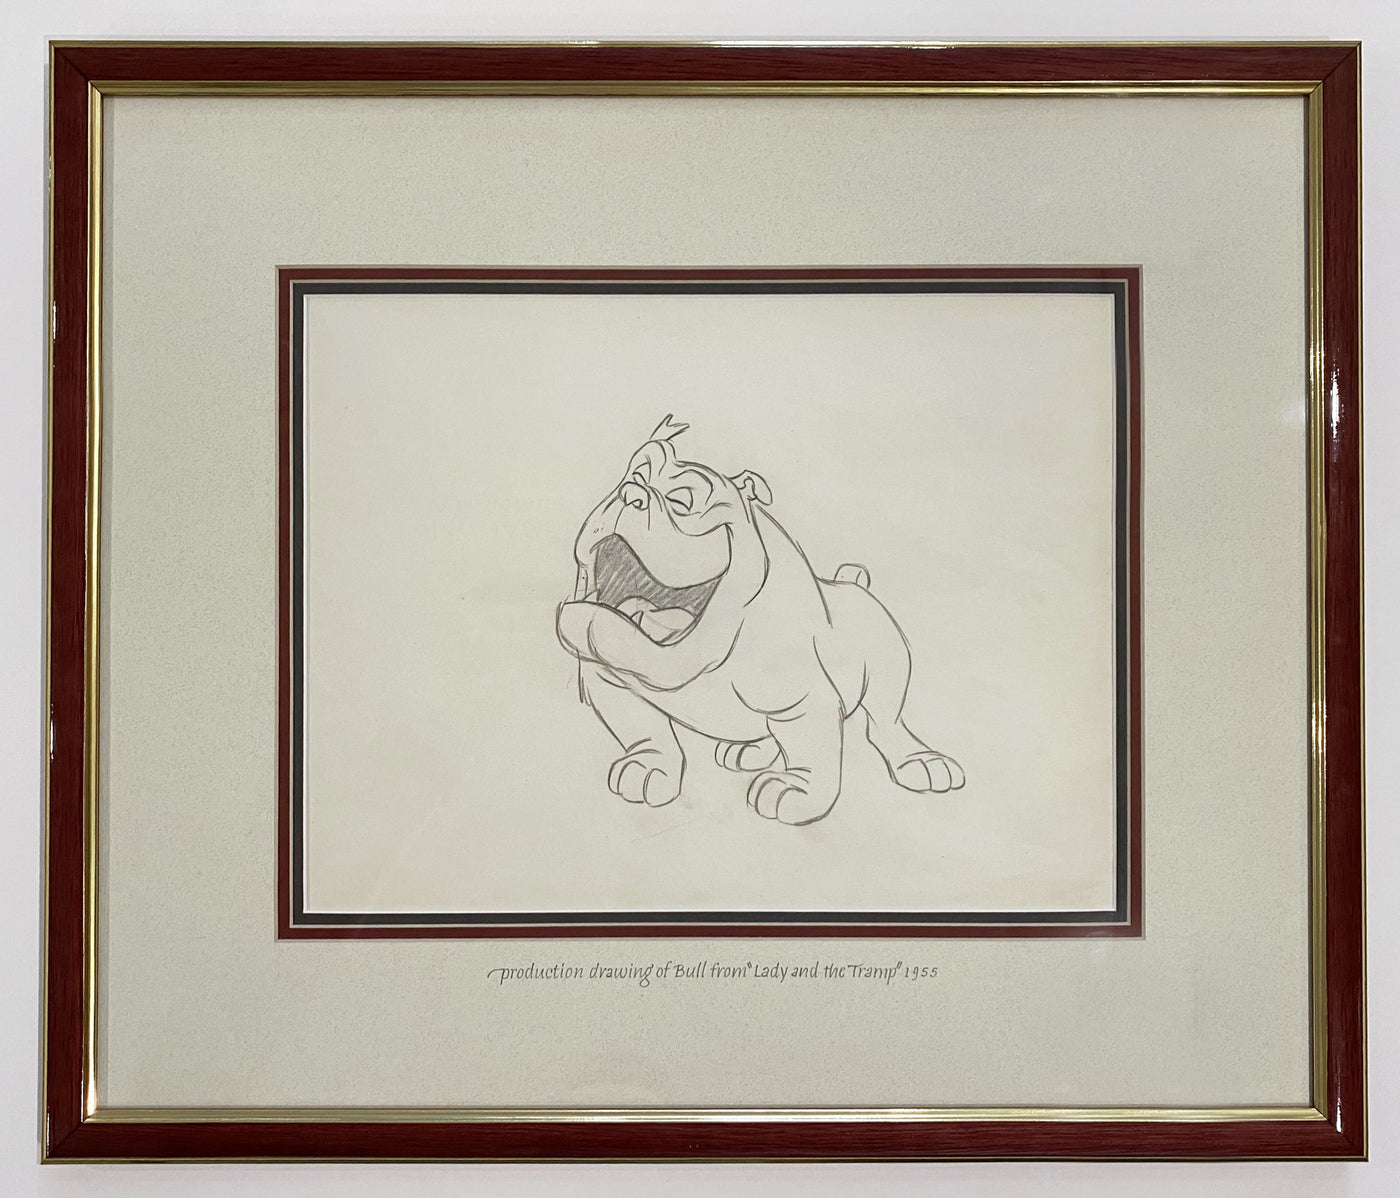 Original Walt Disney Production Drawing of Bull from Lady and the Tramp